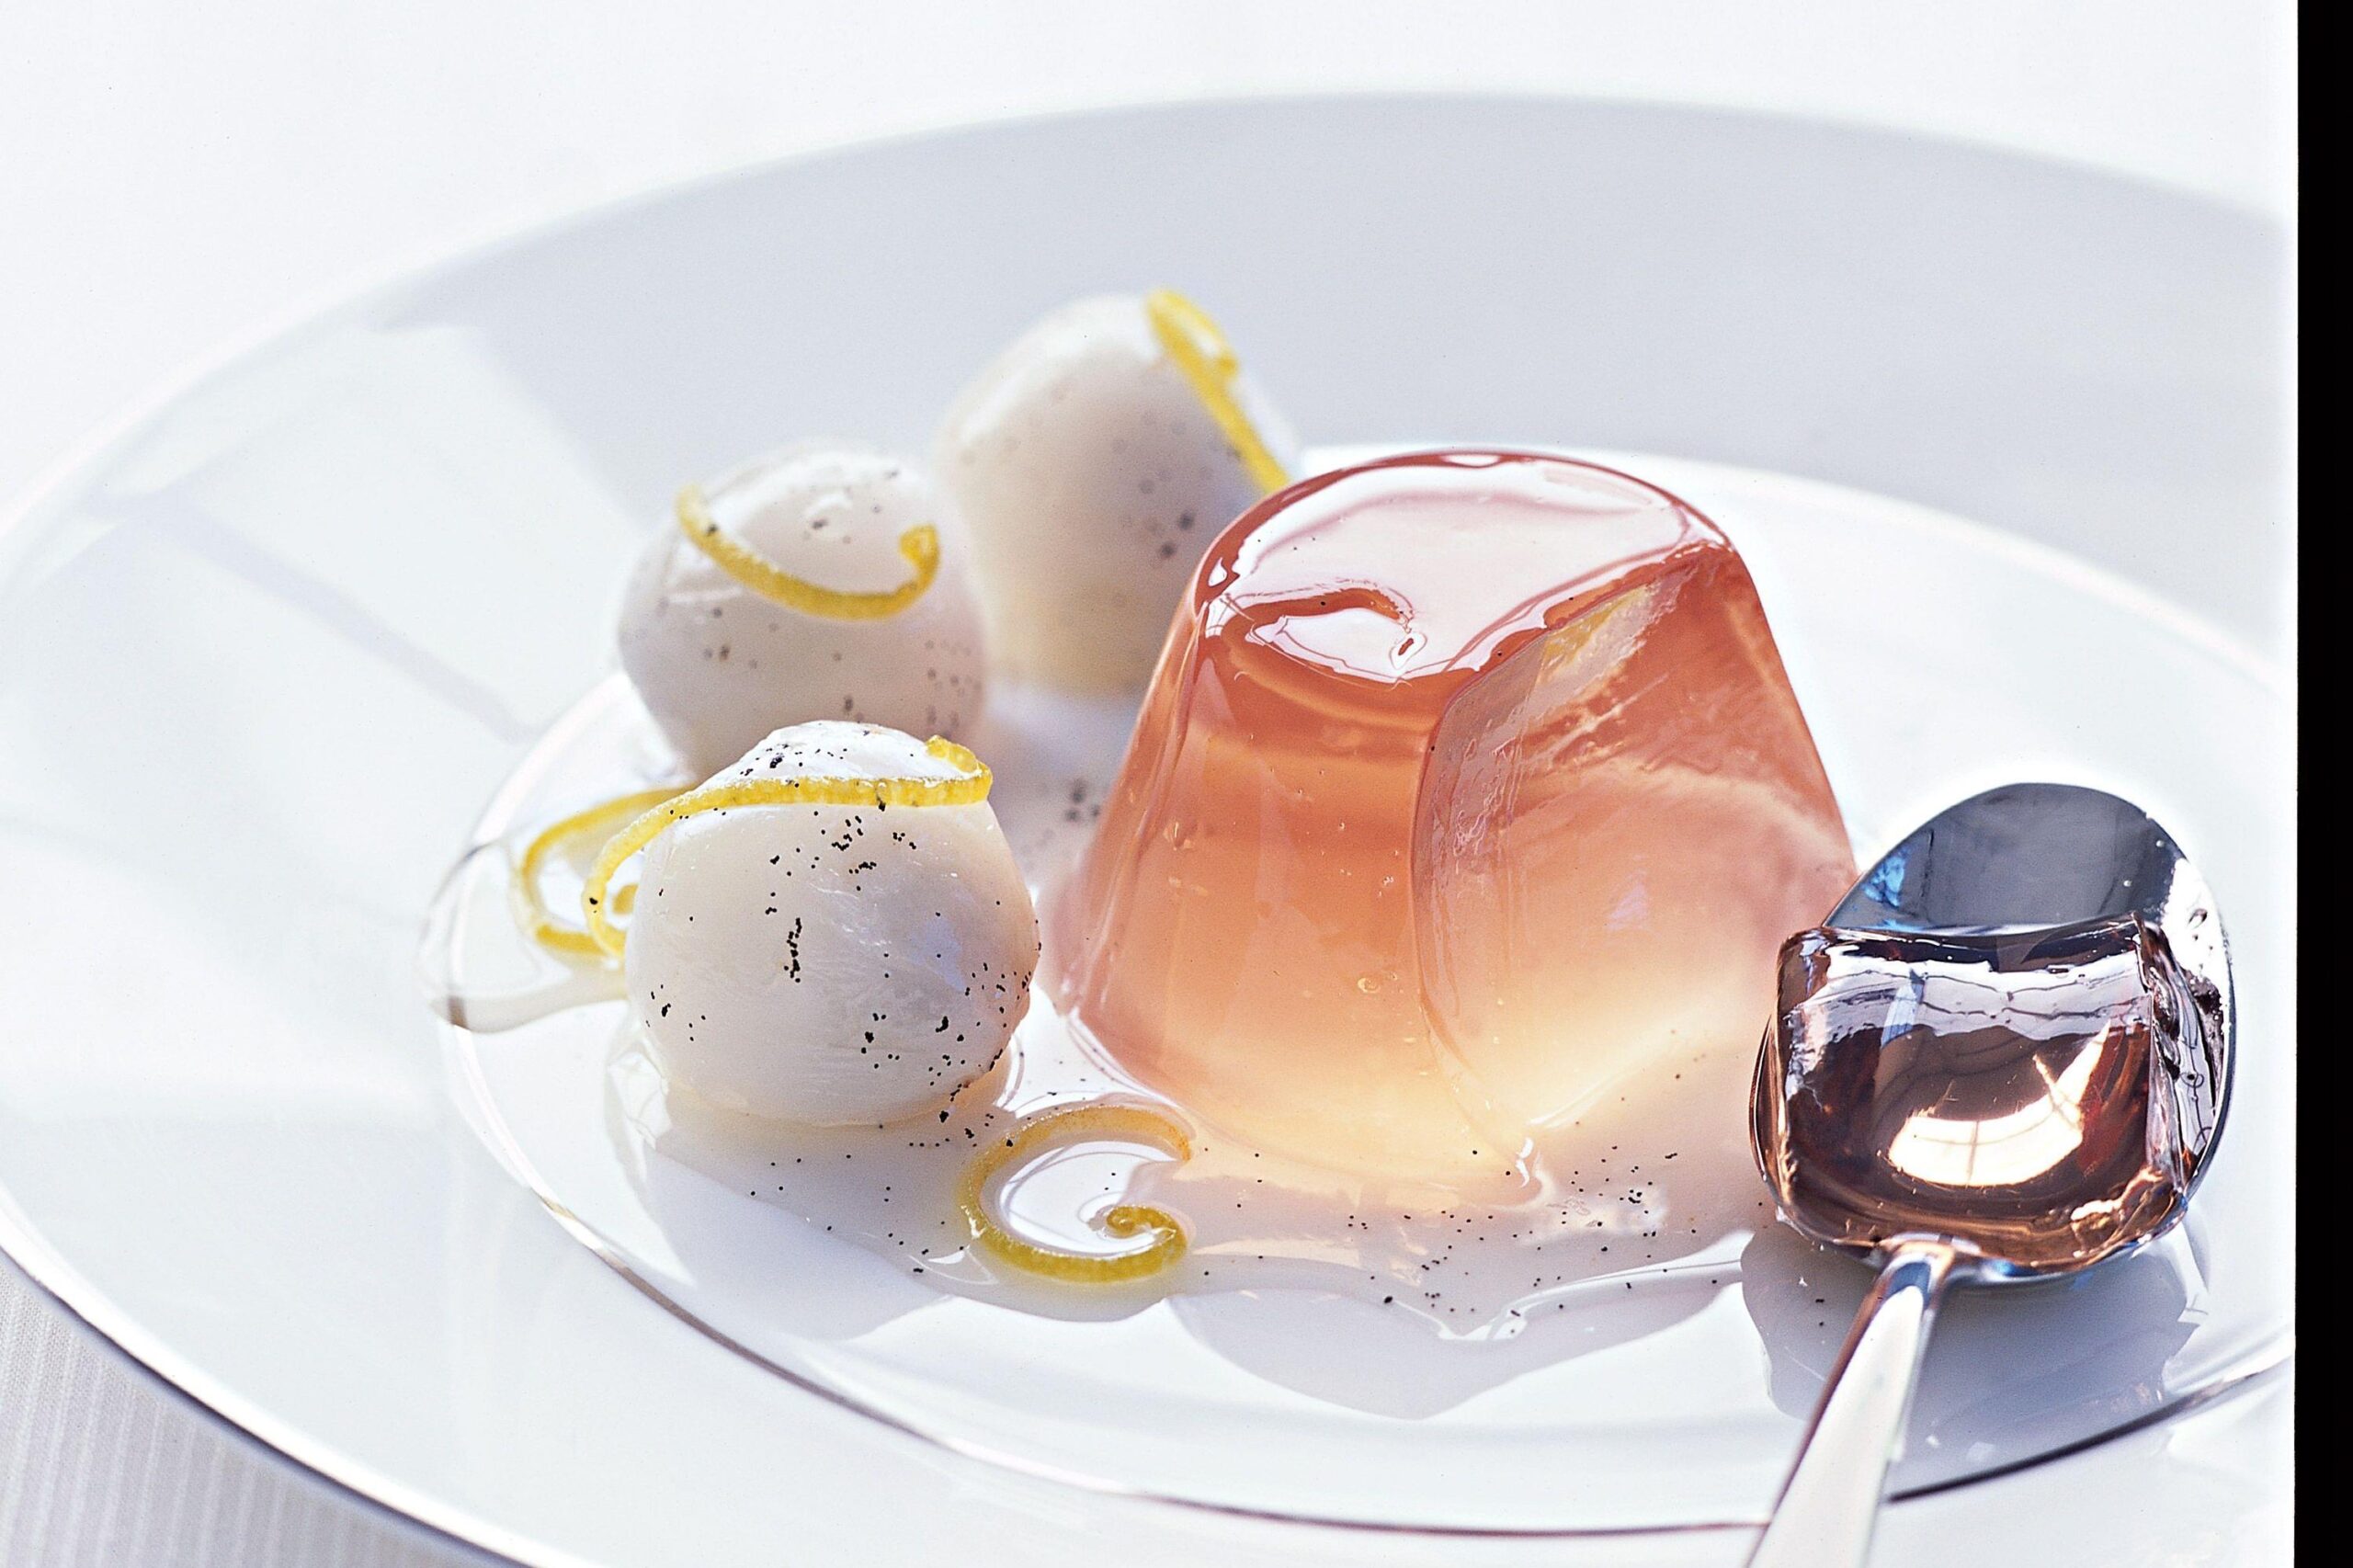  A glass of bubbly in the form of jelly? Don't mind if I do!